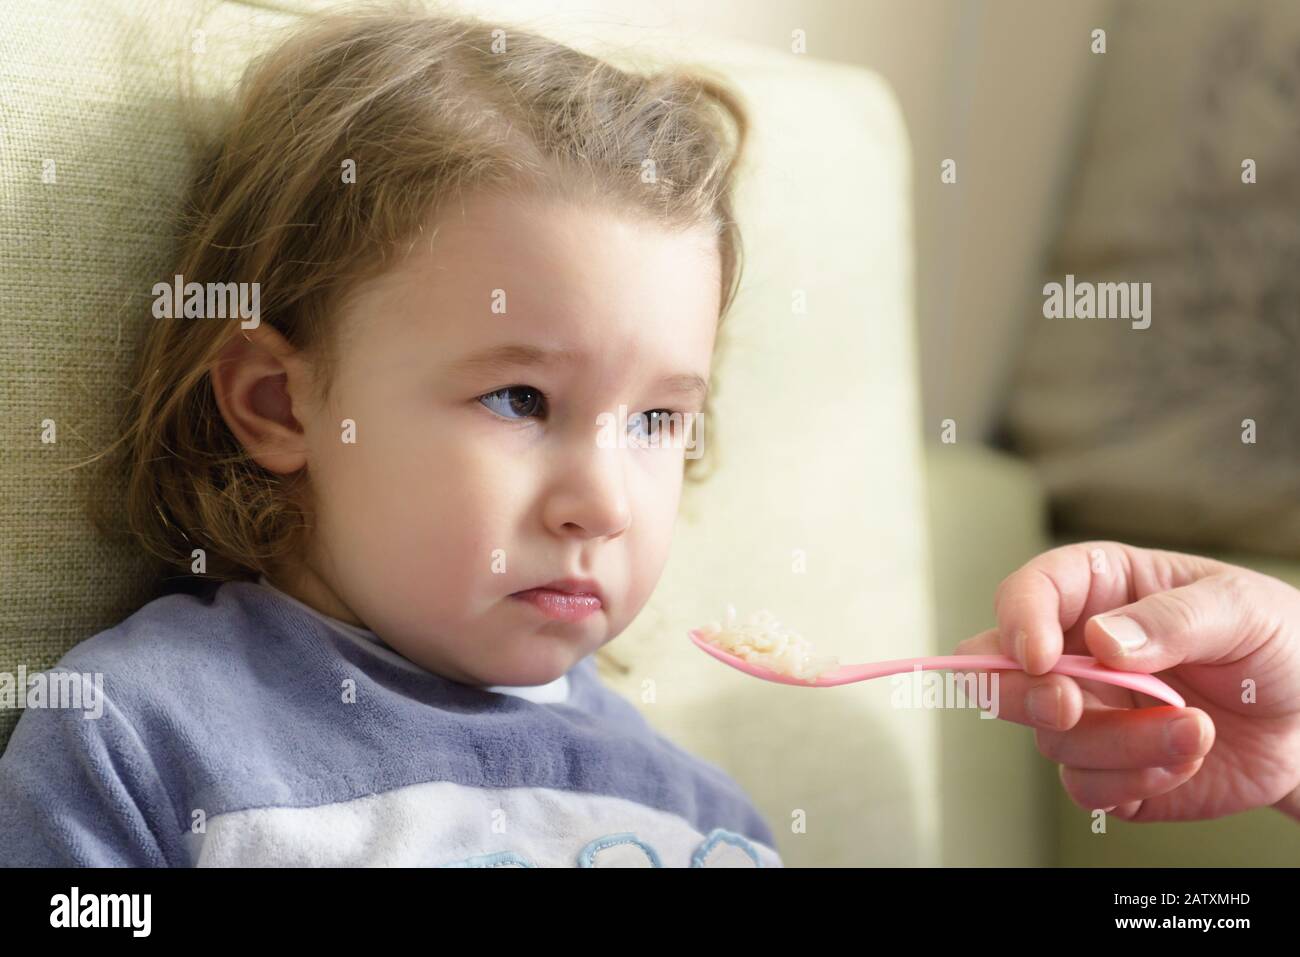 Child refuses to eat. The three year old kid is fed with a spoon at home. Cute baby girl grimaces because she does not like the food. Portrait of funn Stock Photo